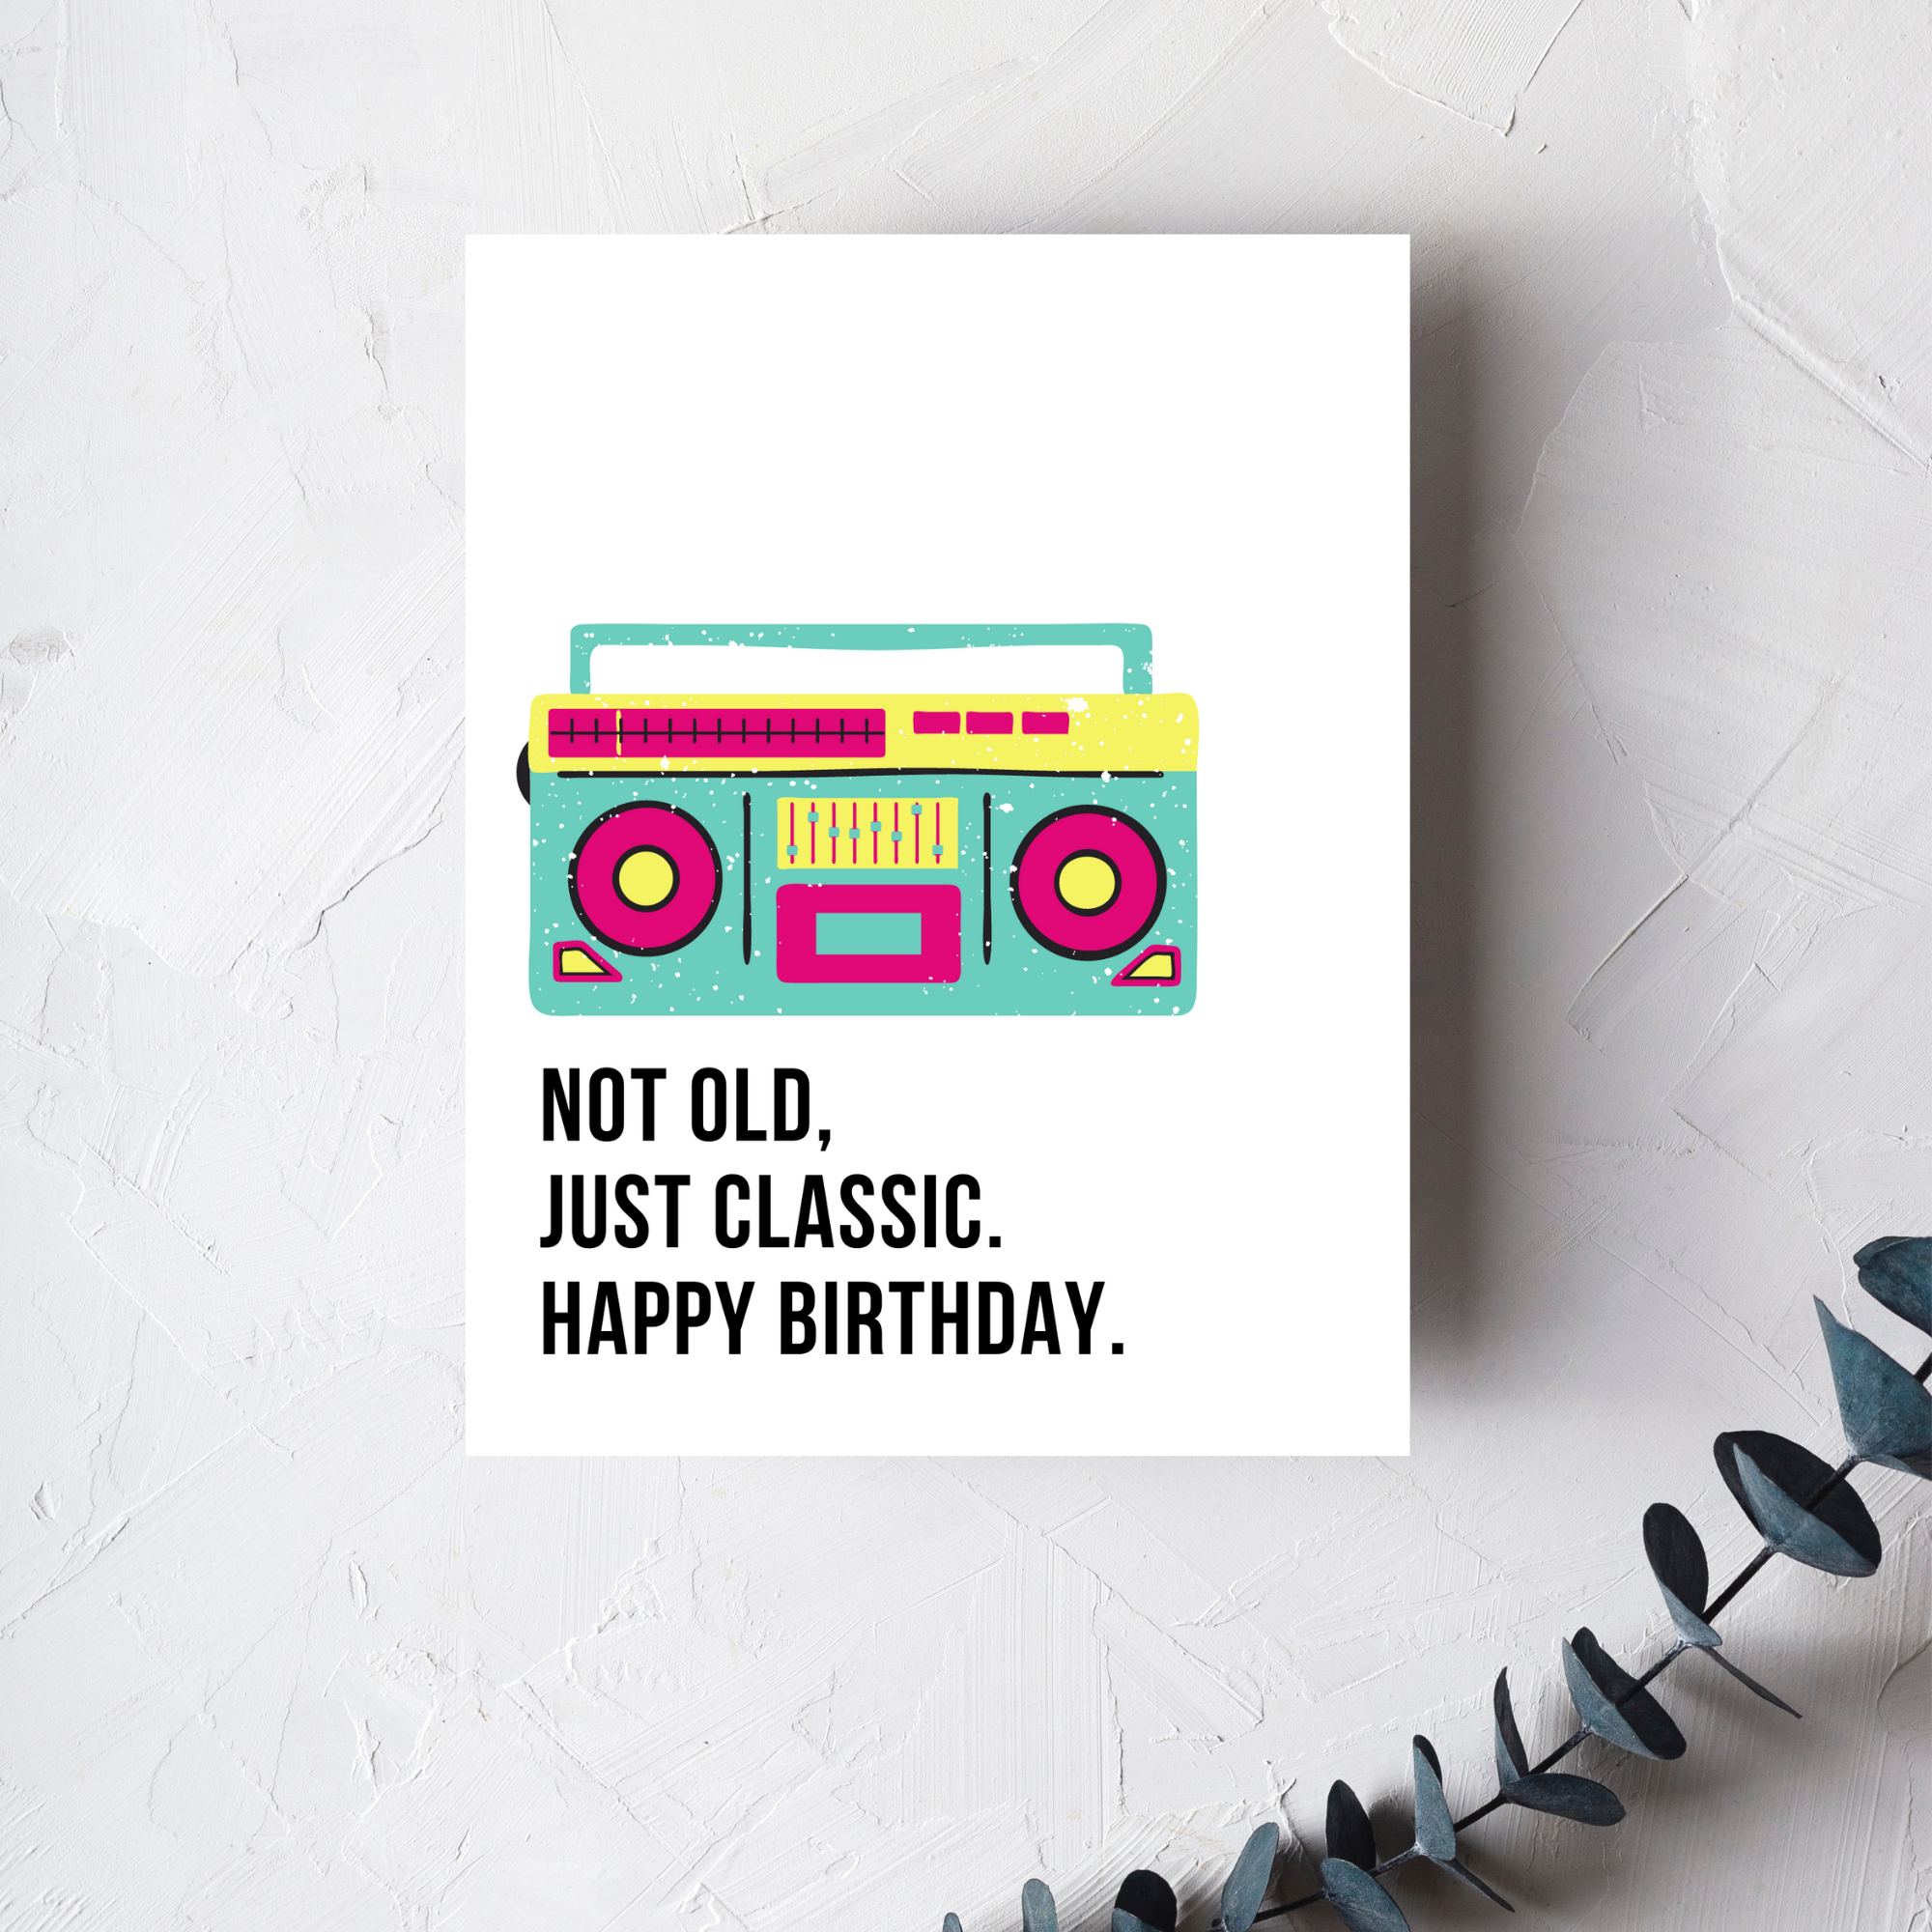 Just Classic - Throwback Birthday Cards (4 Styles)